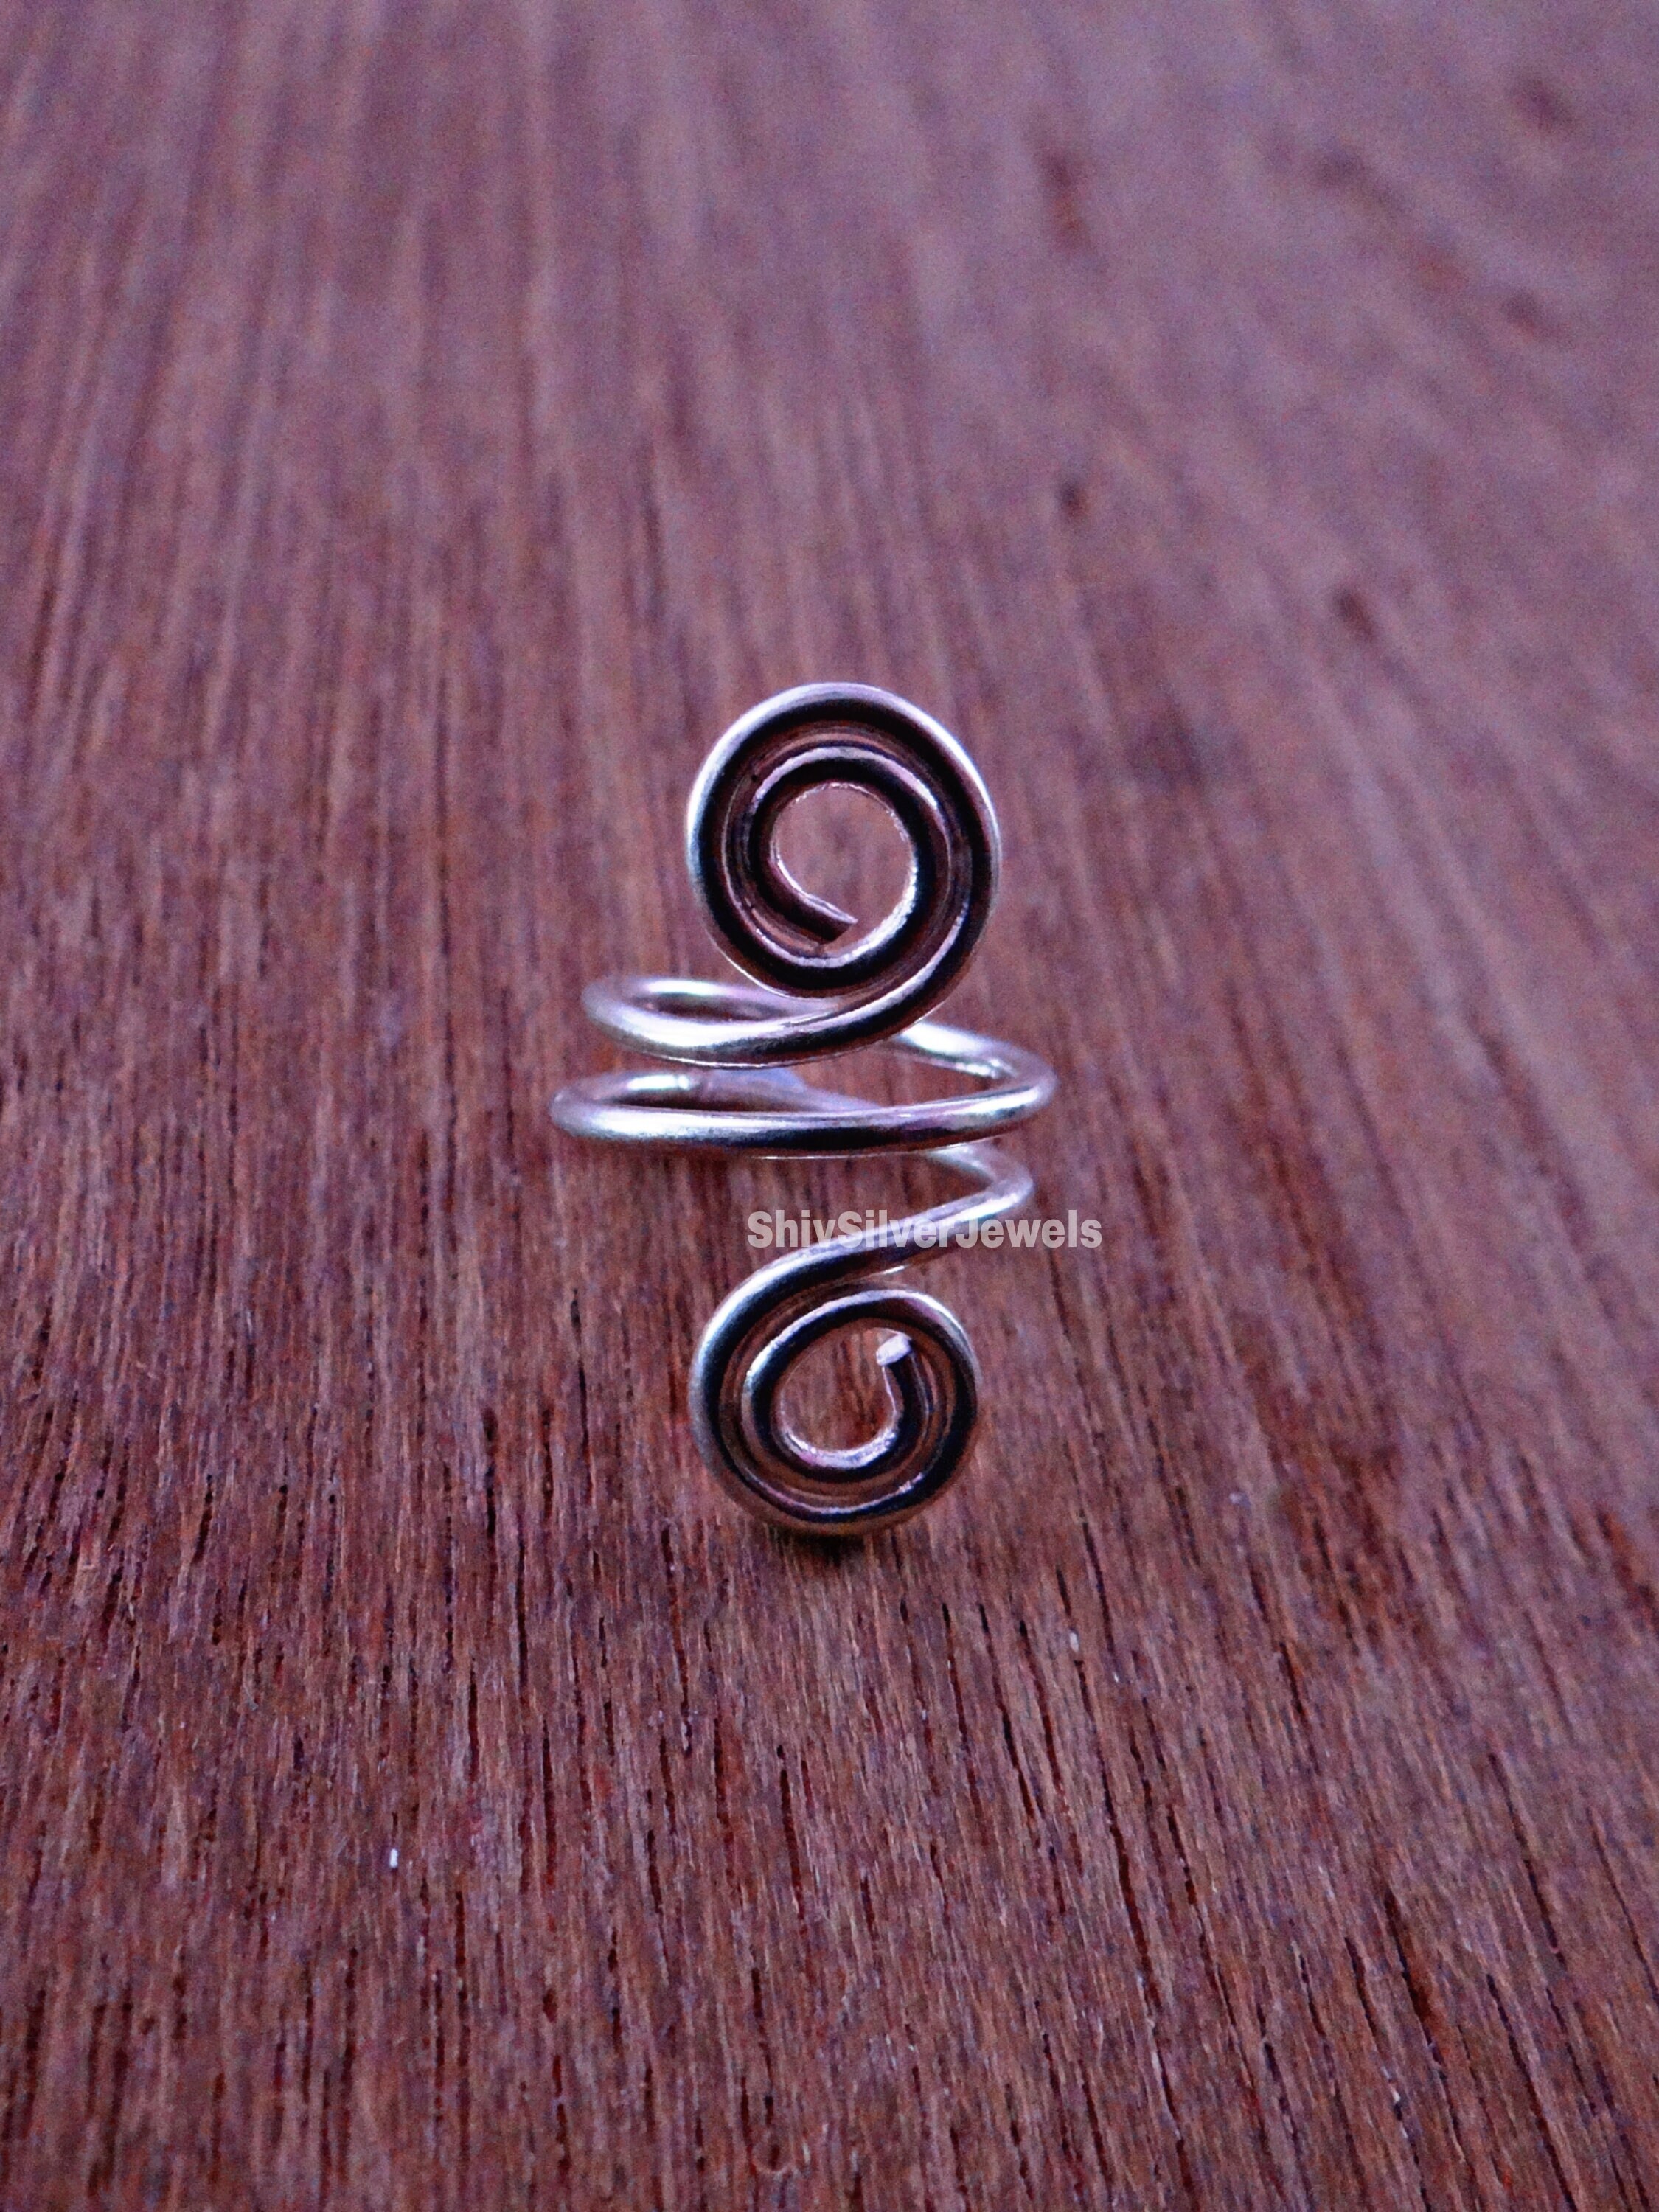 Buy Spiral Ring Sterling Silver Ring Adjustable Ring Round Ring 3D Ring  Circular Ring Greek Key Ring Infinity Swirl Ring Eternity Spiral Band  Online in India - Etsy